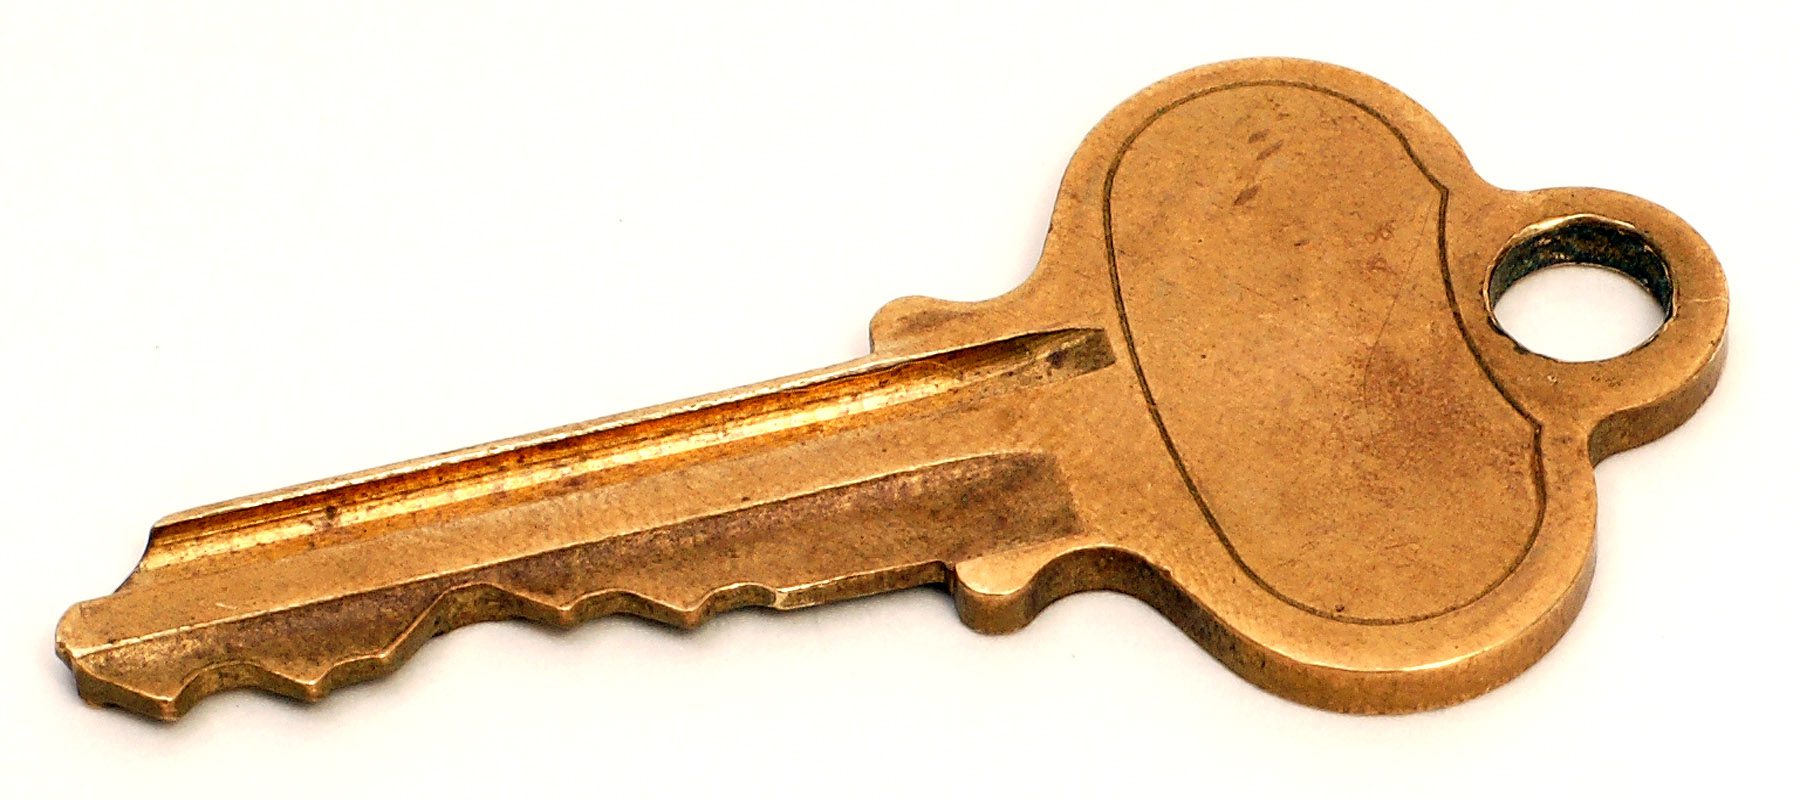 Get your keys as soon as possible when moving on September 1st!